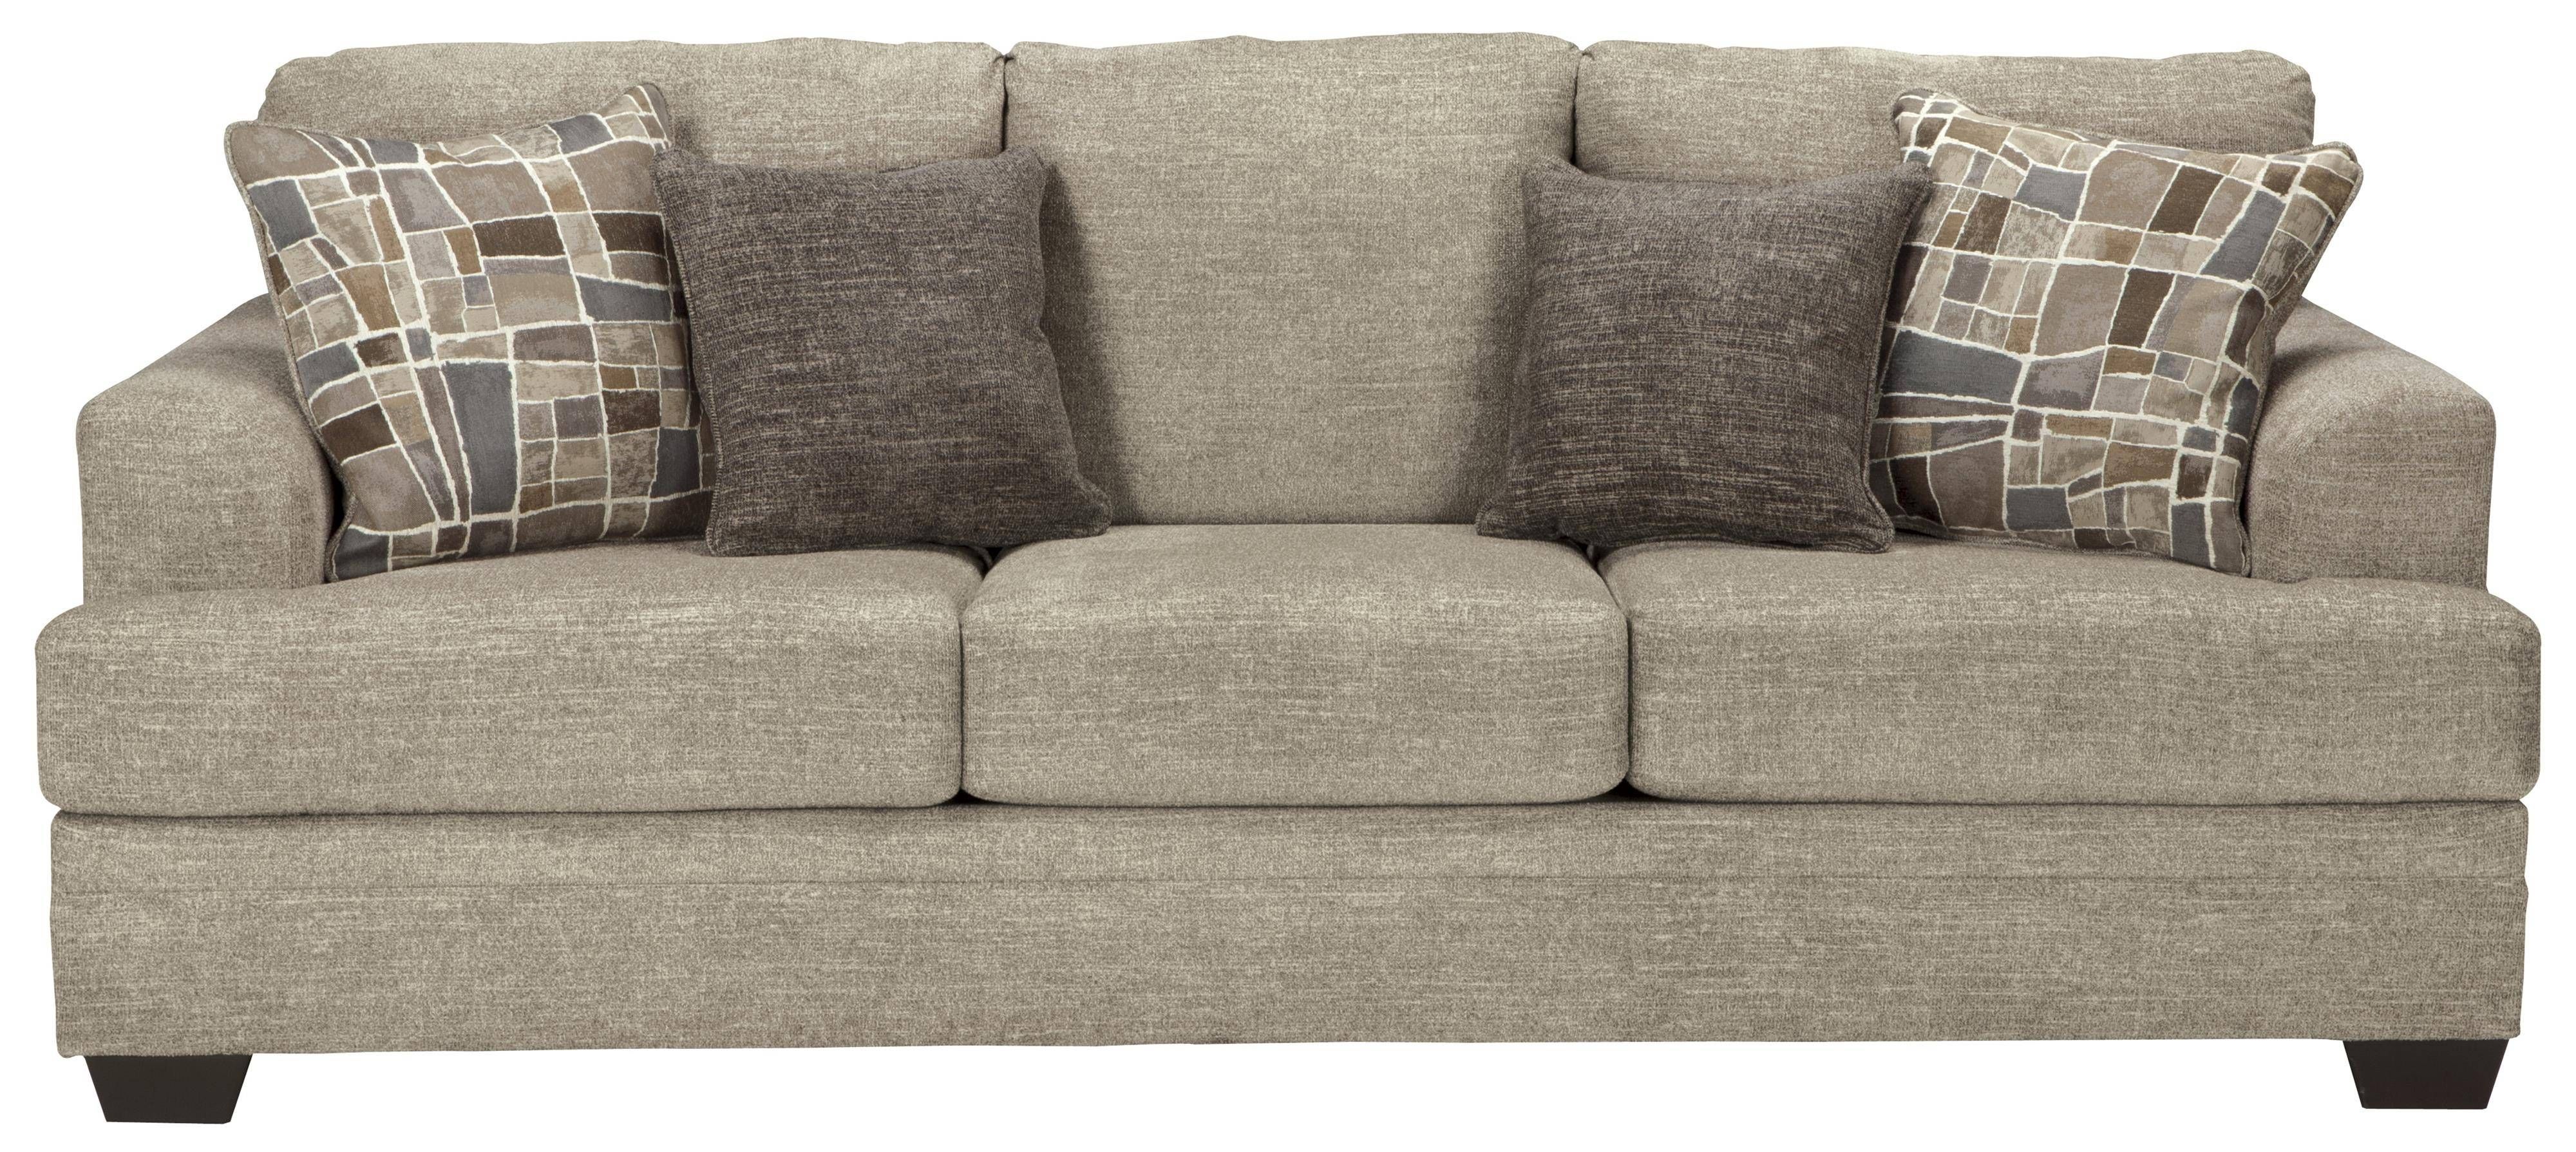 Benchcraft Barrish Contemporary Queen Sofa Sleeper With Flared With Regard To Queen Sofa Beds (View 14 of 15)